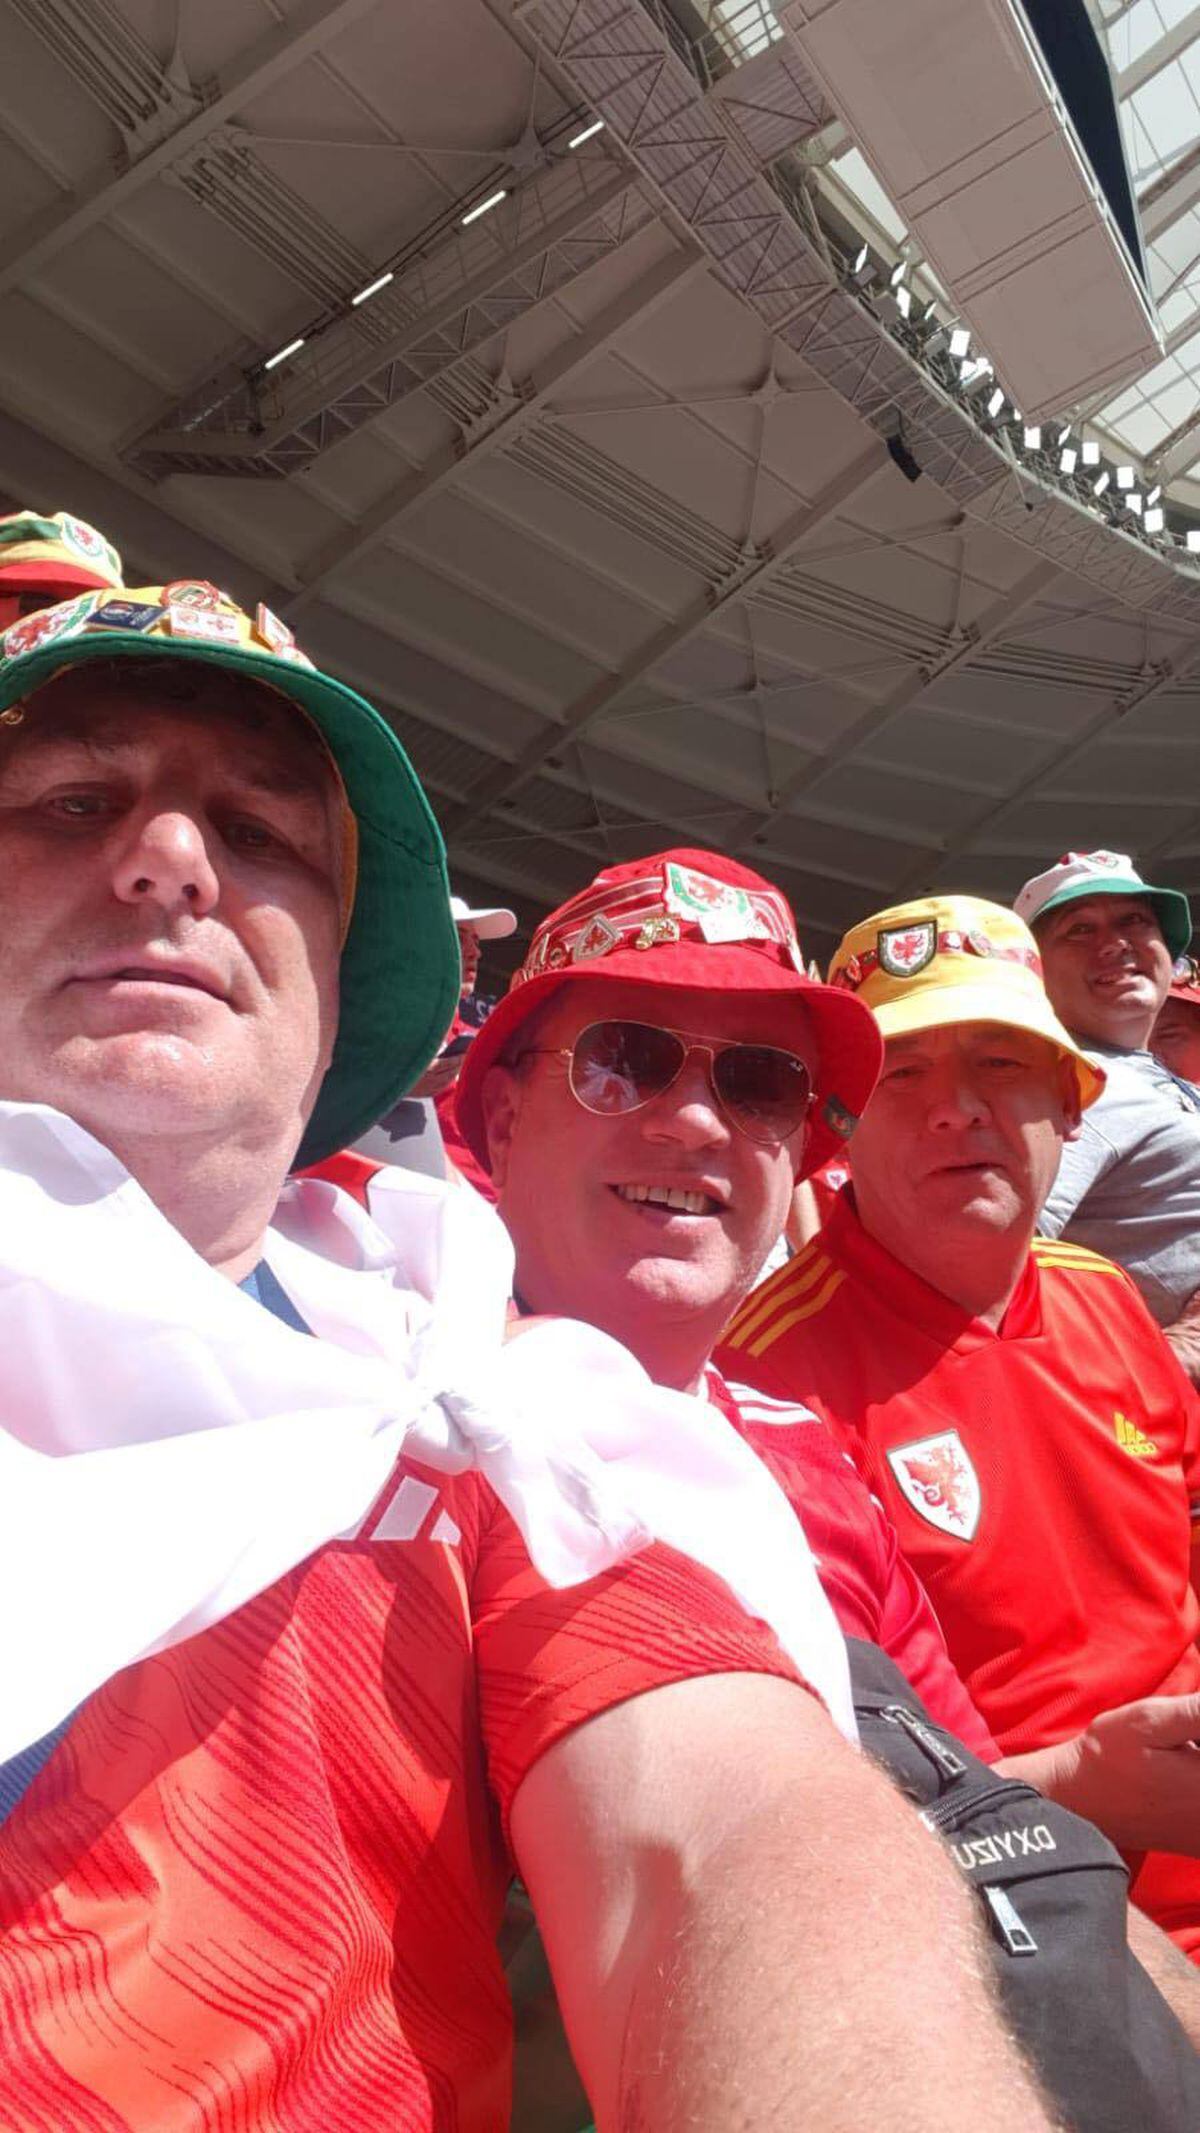 Three of the Chirk fans at the Iran game